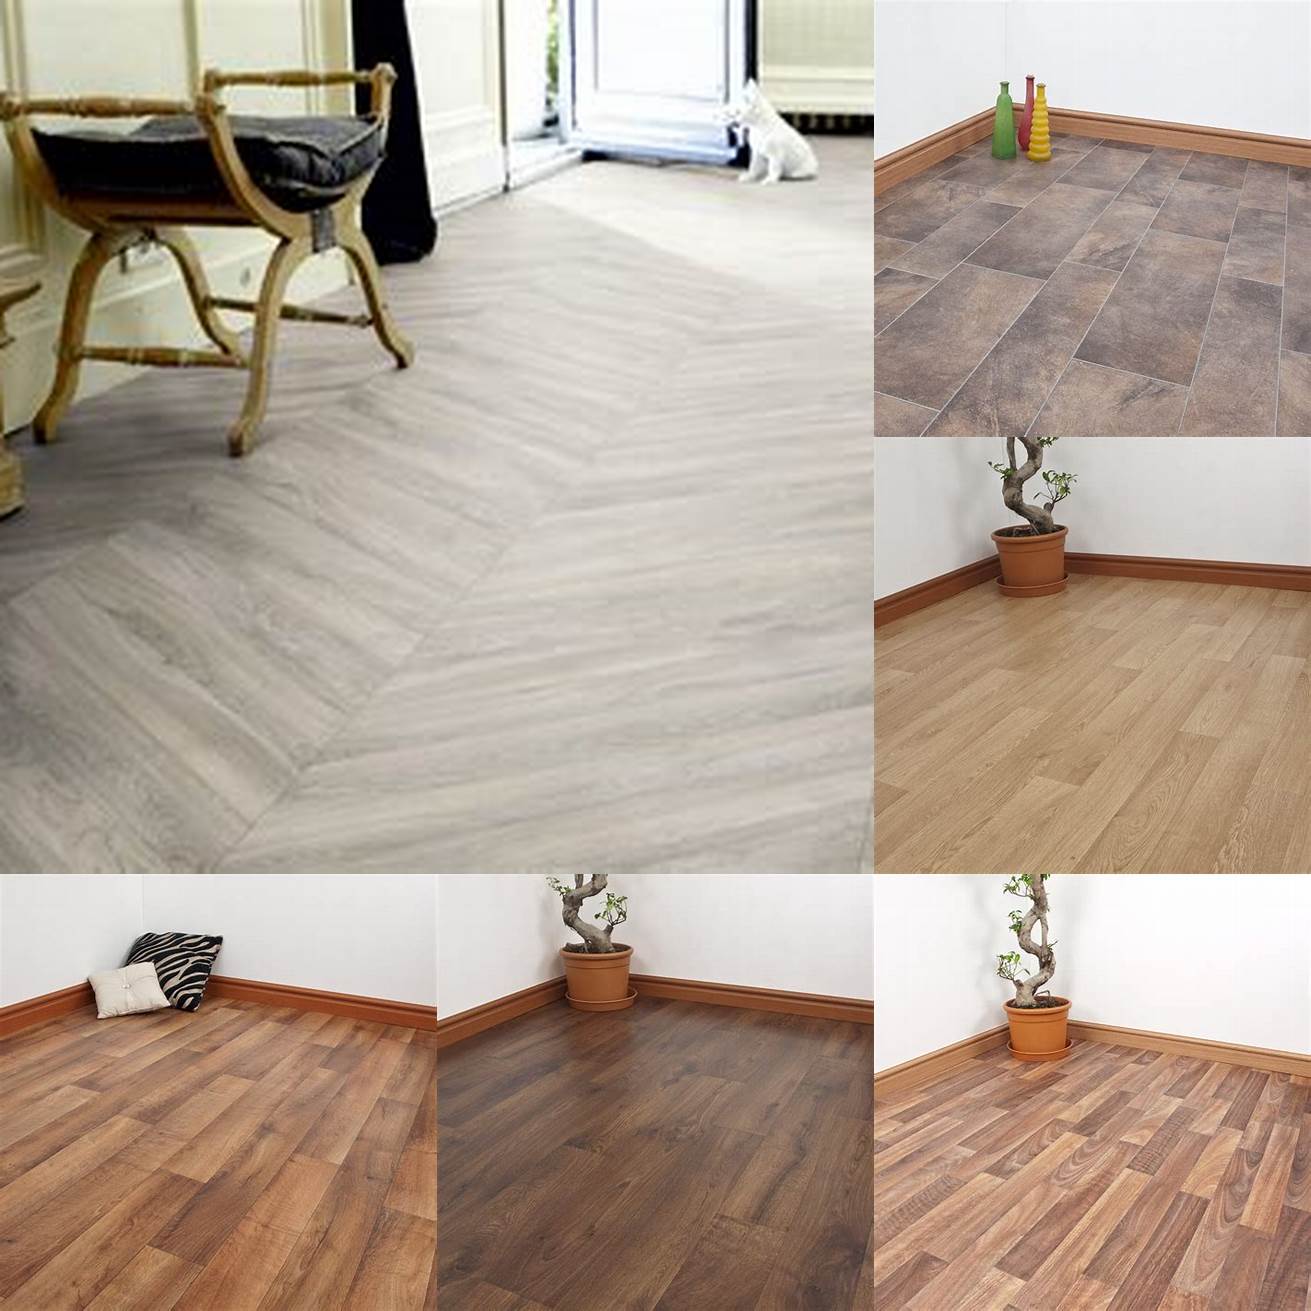 Comfortable Vinyl is a softer and more cushioned flooring option compared to other types of flooring such as tiles or hardwood Its comfortable to stand on making it ideal for homeowners who love to cook or spend time in the kitchen